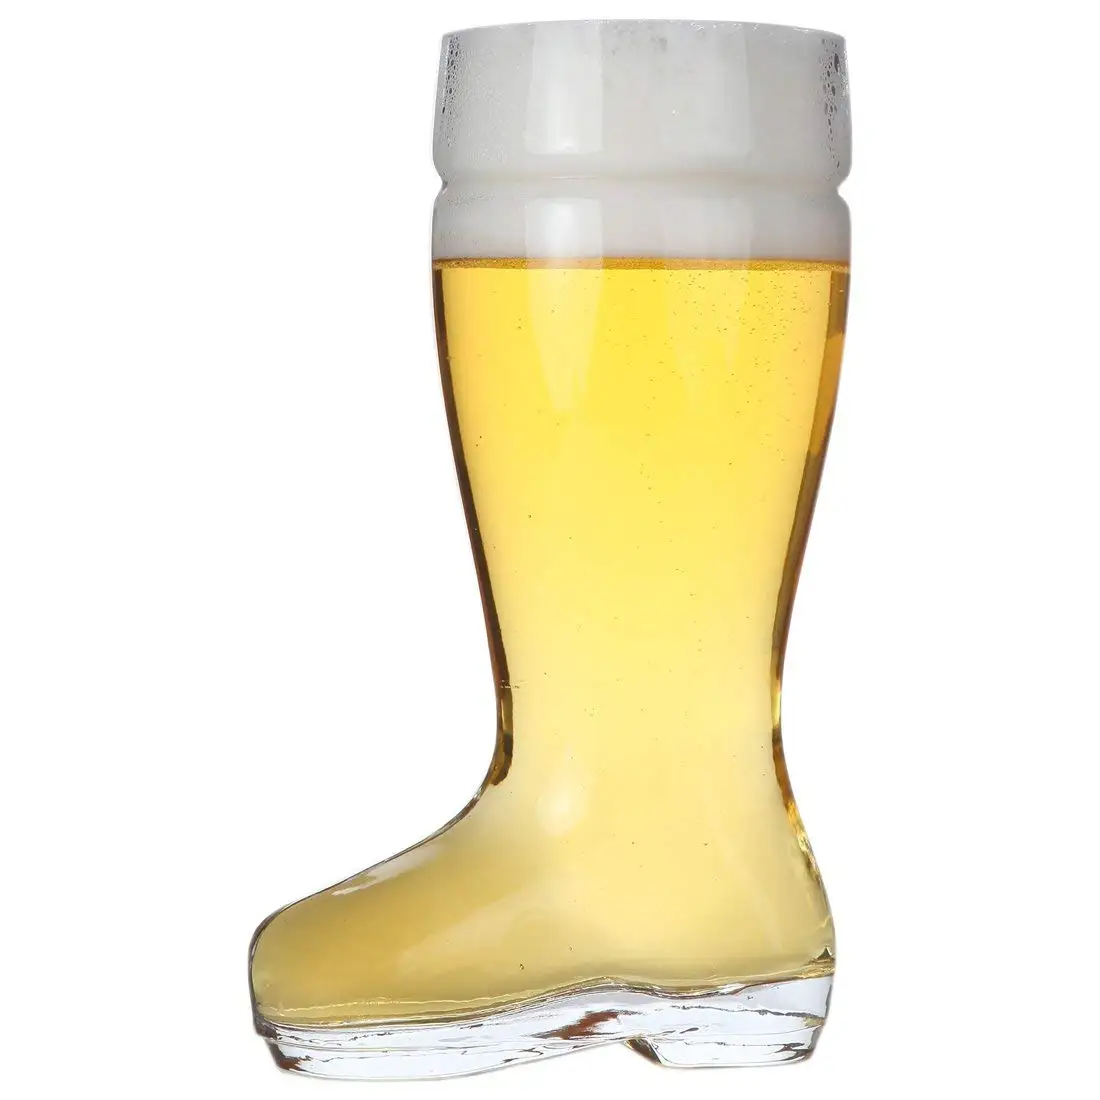 Buy Lilys Home Das Boot Oktoberfest Beer Stein Glass Great For Restaurants Beer Gardens And